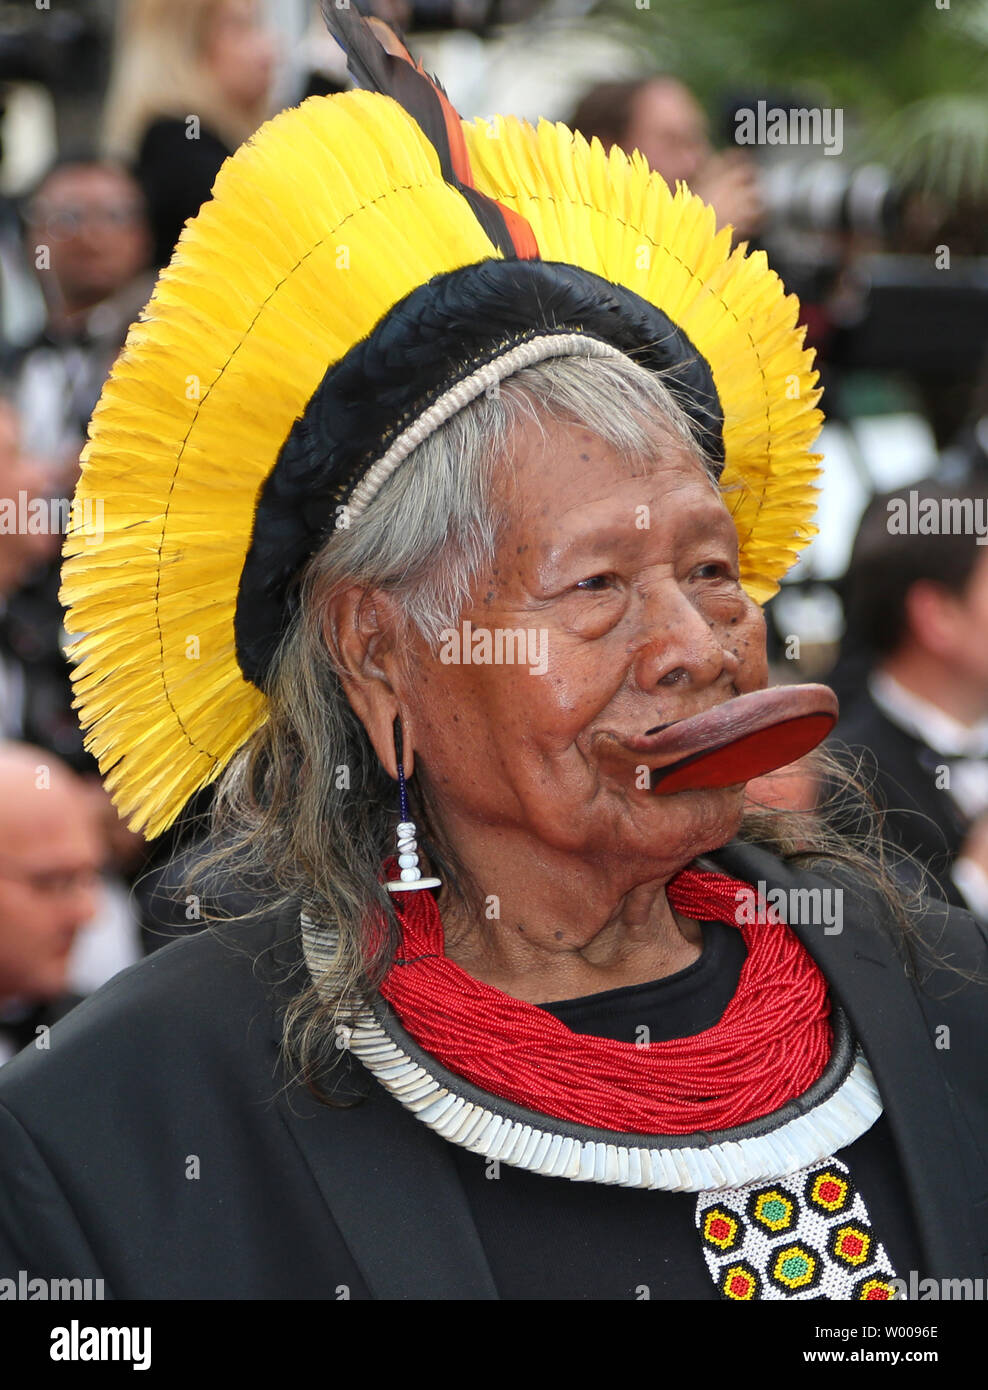 Chief Raoni Metuktire arrives on the red carpet before the screening of the film 'Sybil' at the 72nd annual Cannes International Film Festival in Cannes, France on May 24, 2019. Metuktire is chief of the Kayapo people, a Brazilian Indigenous group.   Photo by David Silpa/UPI Stock Photo